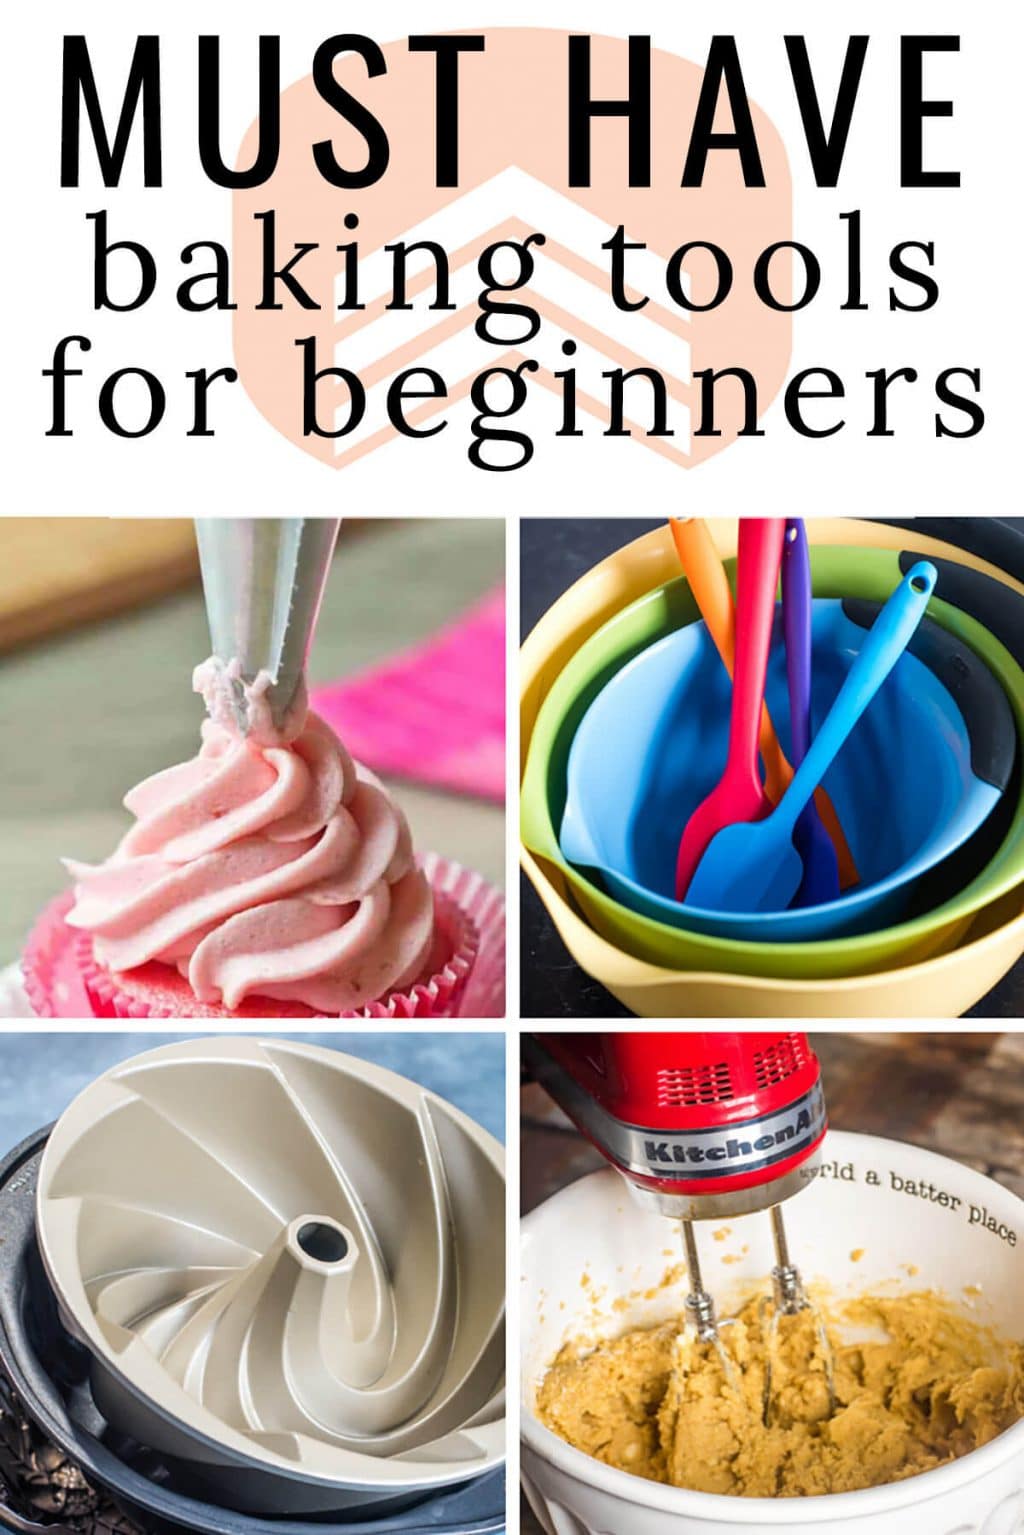 7 Top Pastry Chef Tools and Equipment | Easy Baking Tips and Recipes:  Cookies, Breads & Pastries : Food Network | Food Network